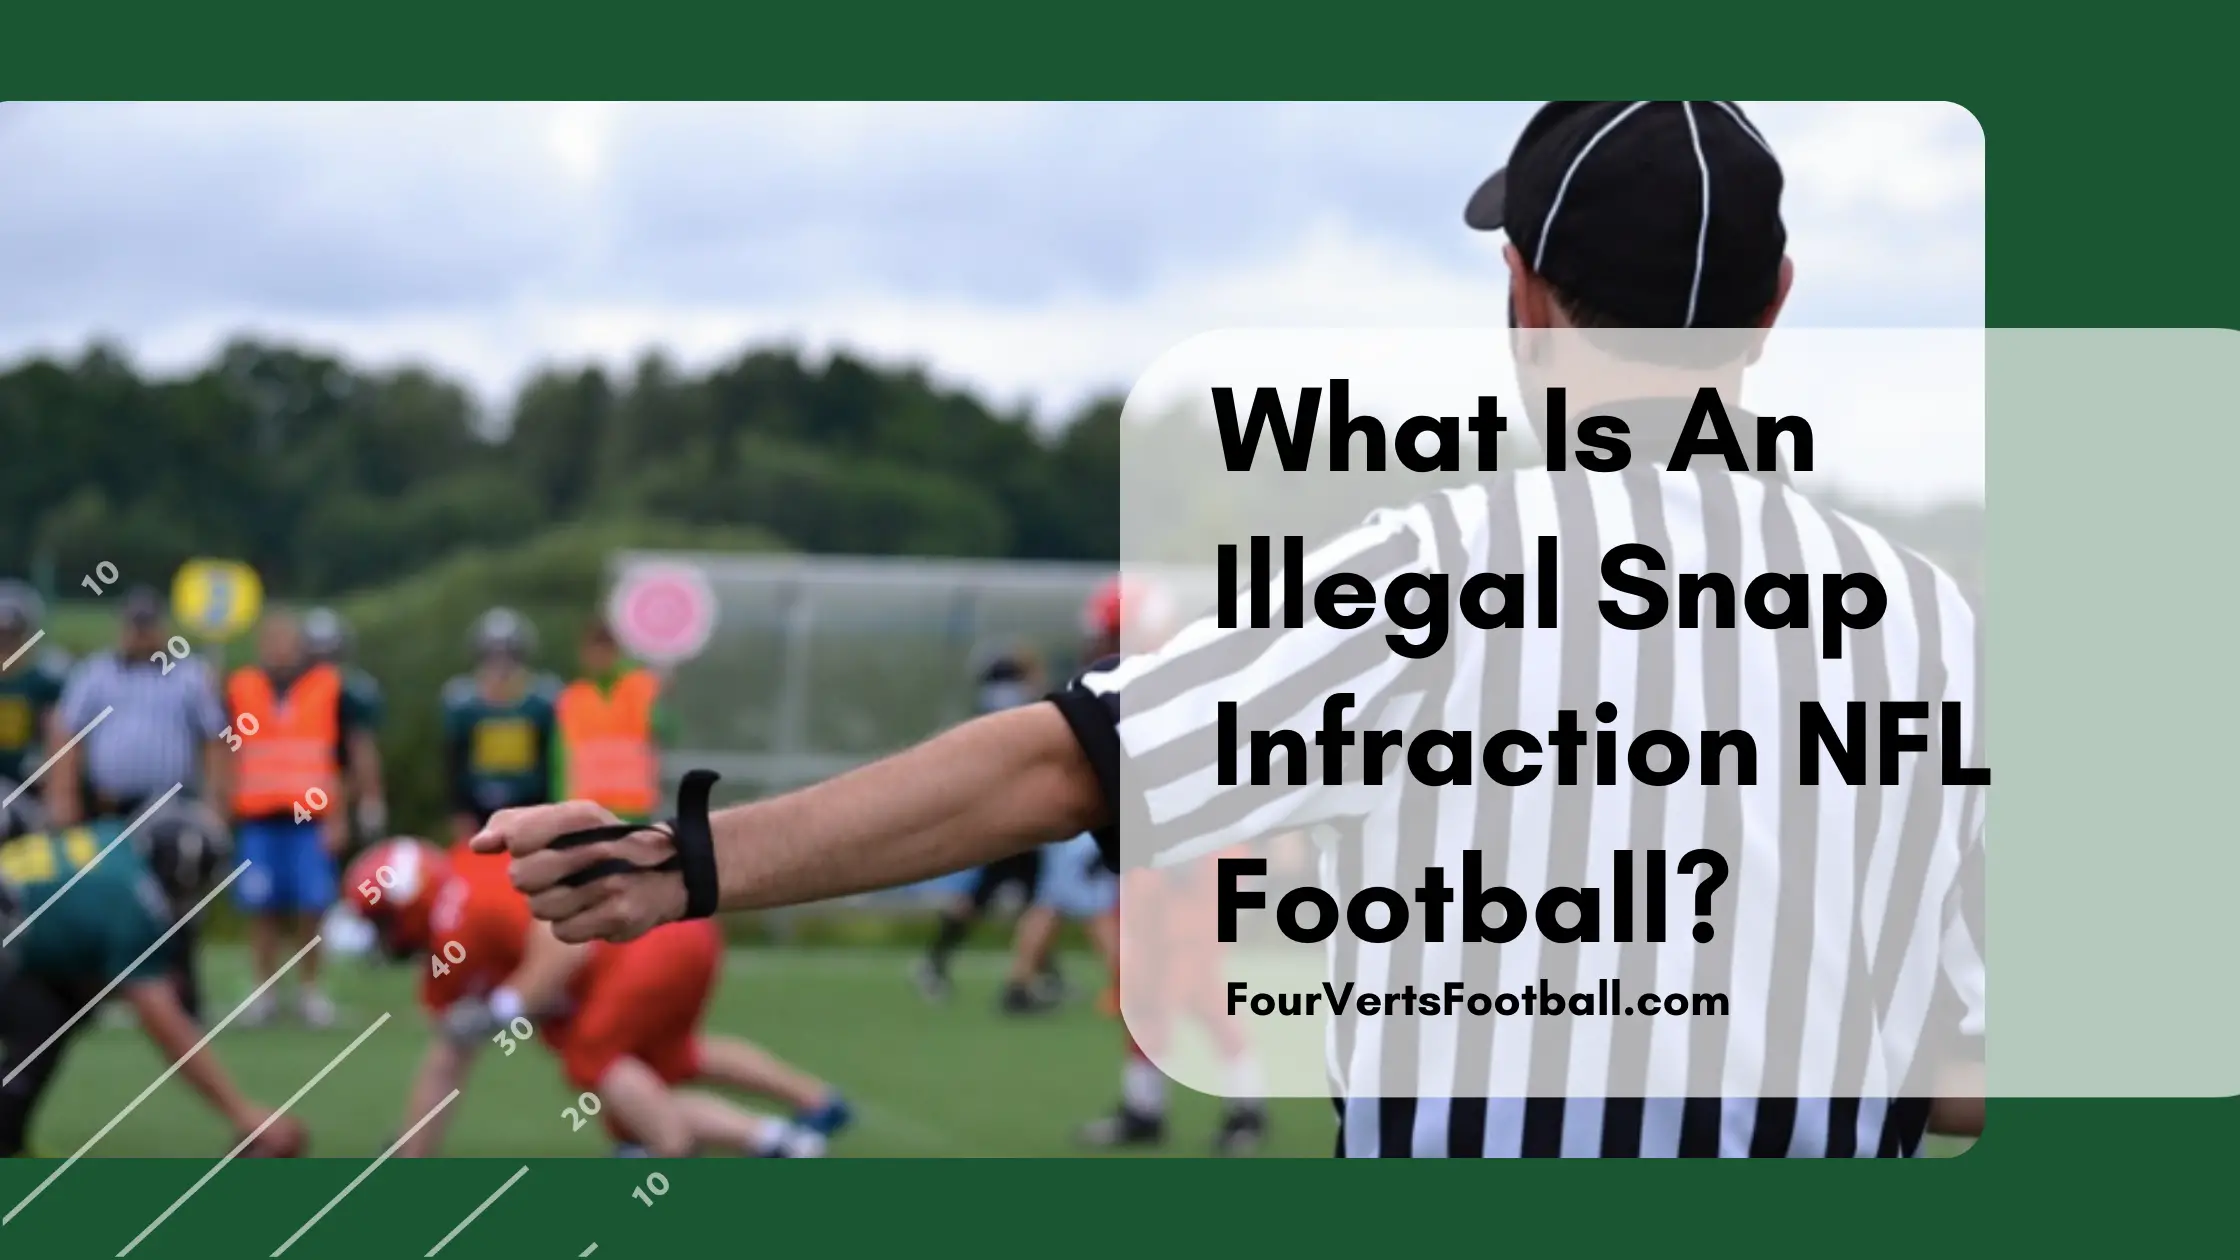 What is an illegal snap infraction